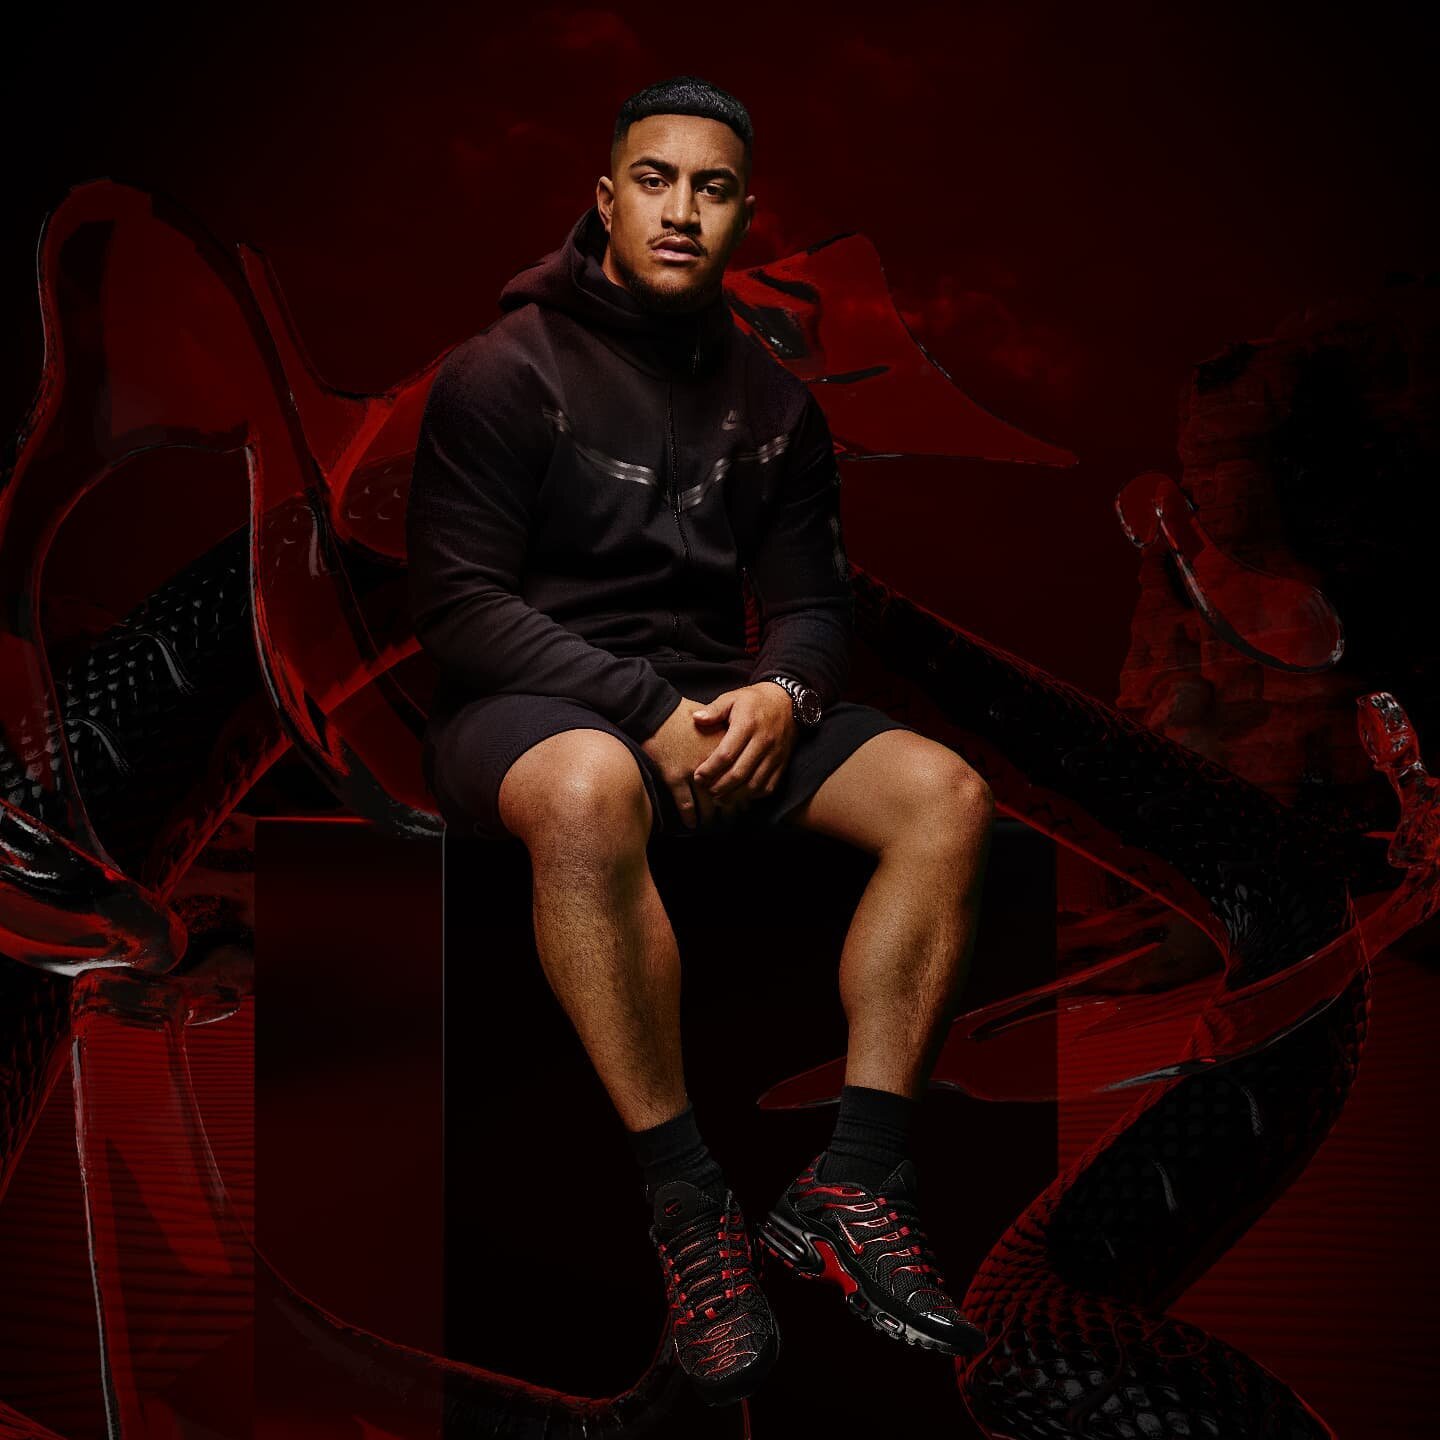 One of our favorite projects of 2021 @nike Tuned Red Bellied Blacks with @lisi4300 for @footlocker_au. 
 
It was amazing to work with this superteam of creatives! 

Campaign Concept, Creative Direction and Graphic Design by @spacebetween_

3D animati